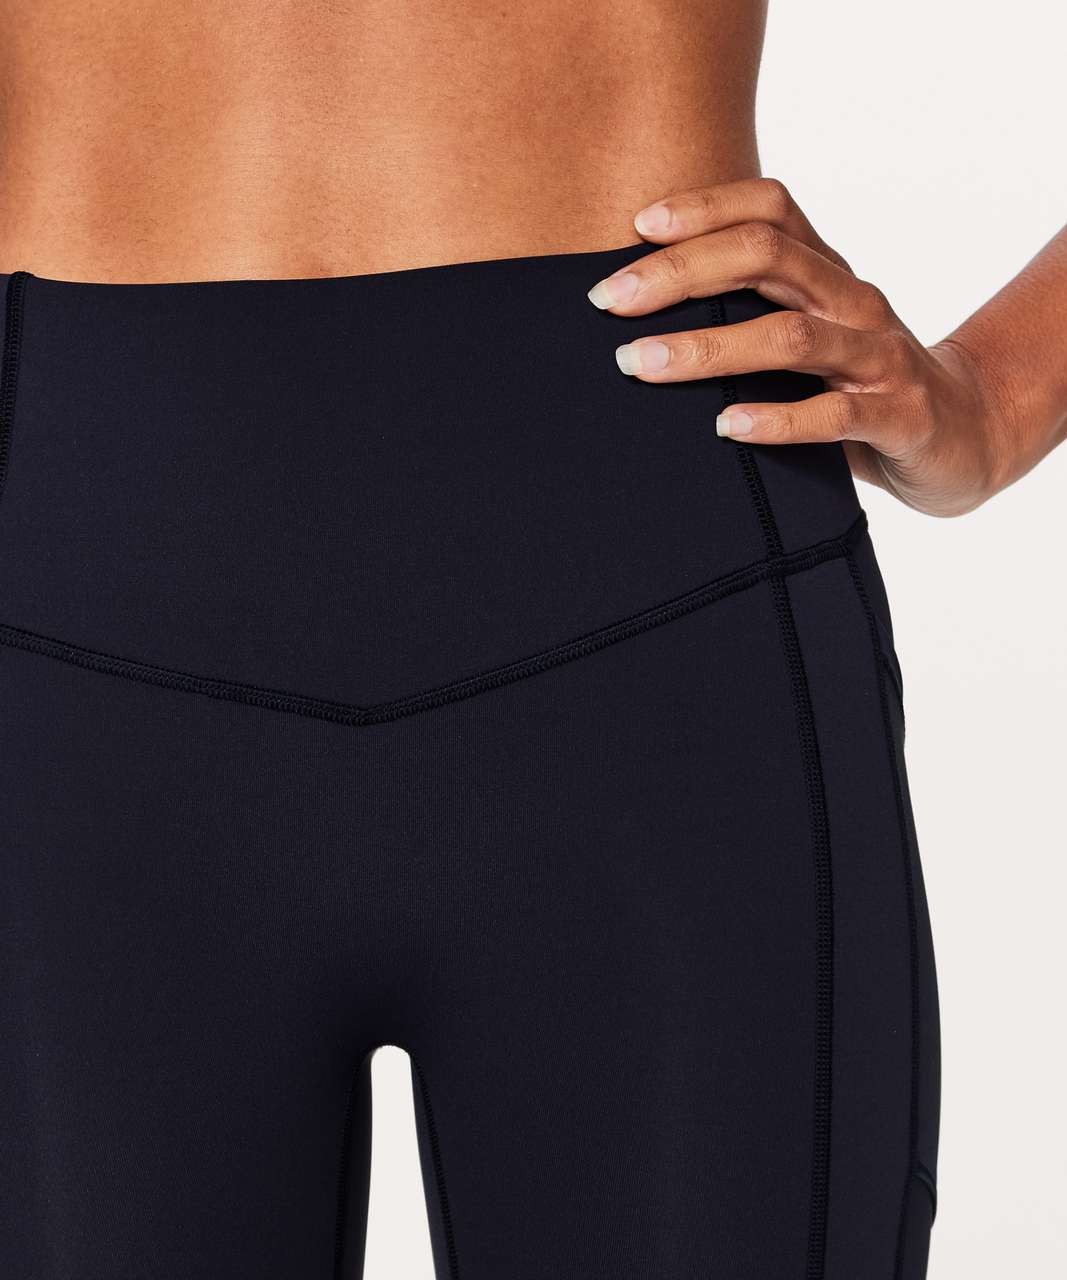 Lululemon All The Right Places Pant II *28 - Midnight Navy - lulu